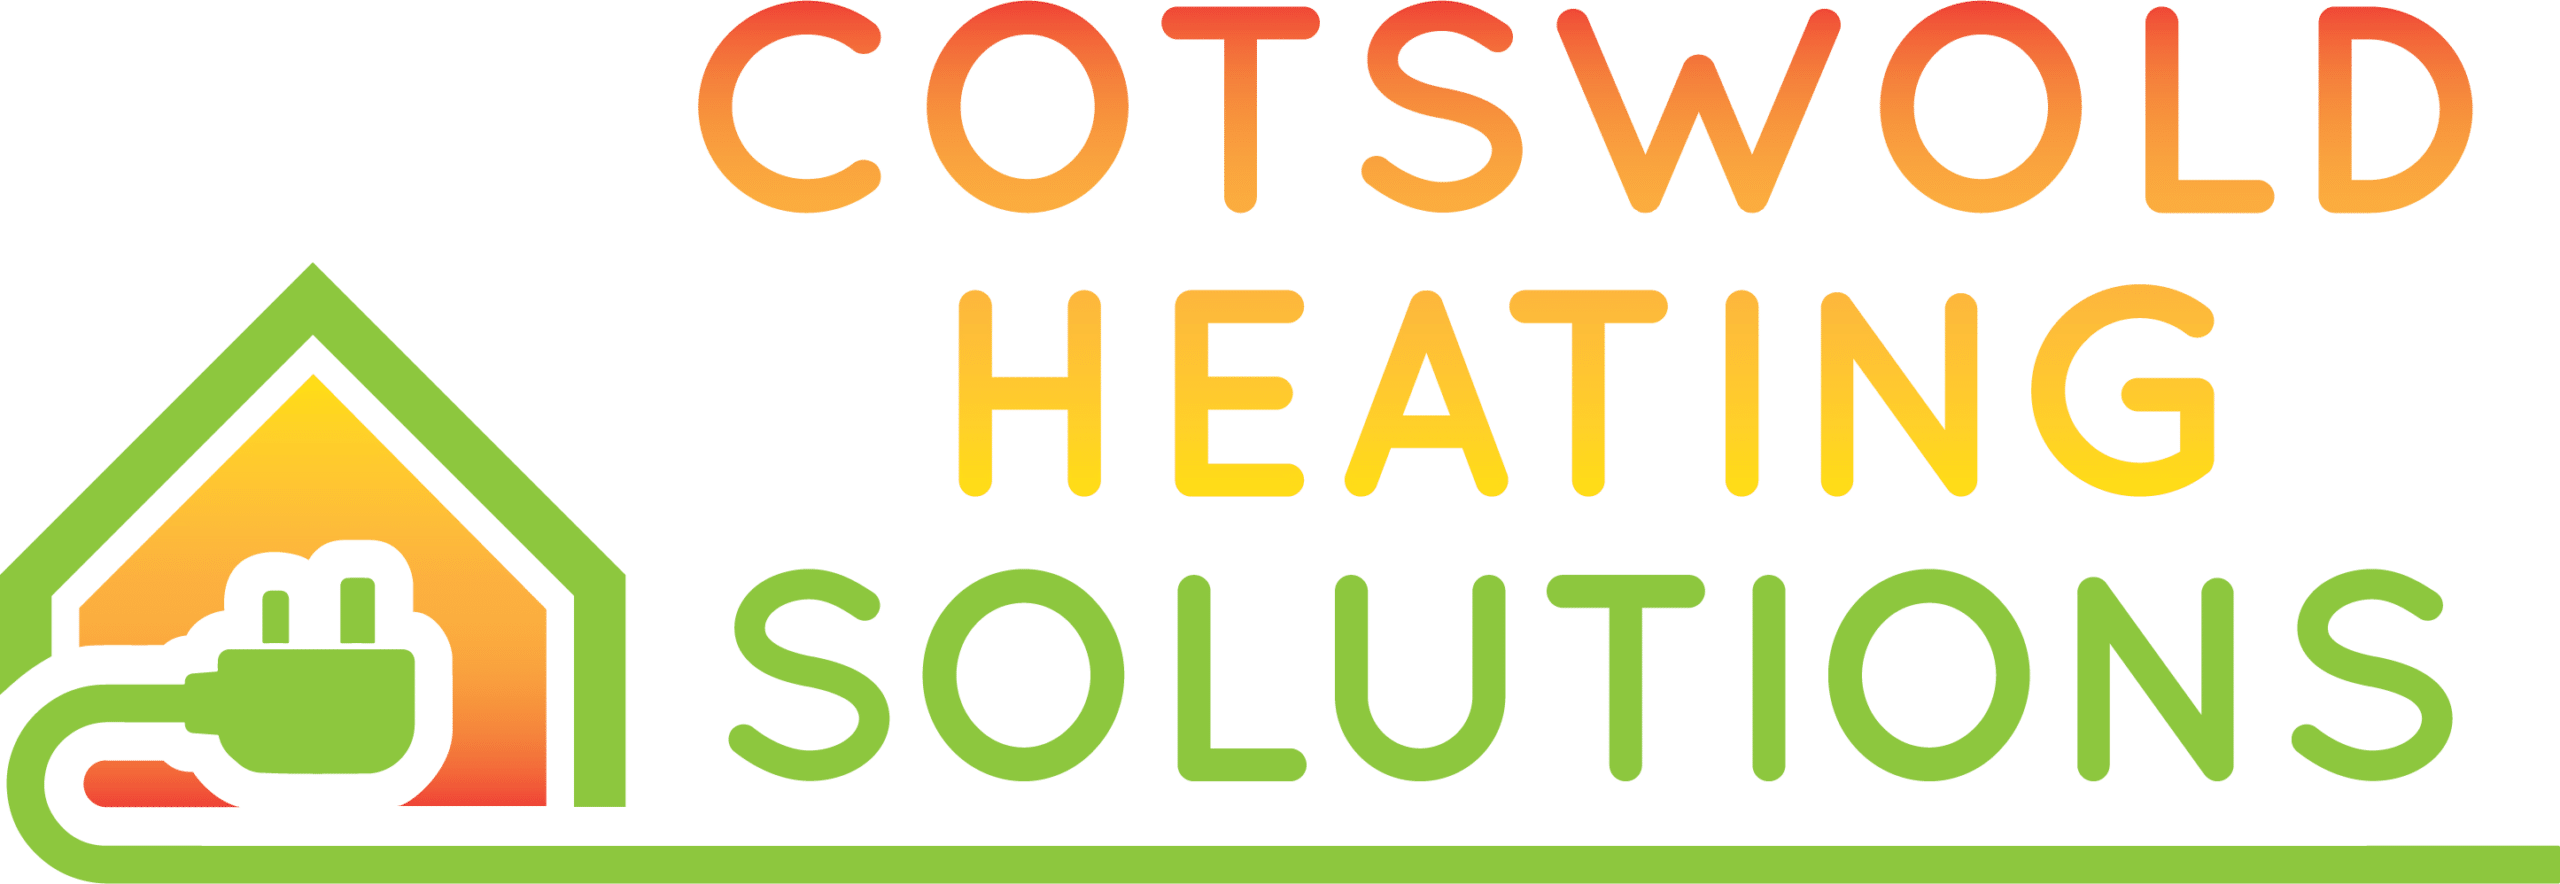 Cotswold Heating Solutions Logo